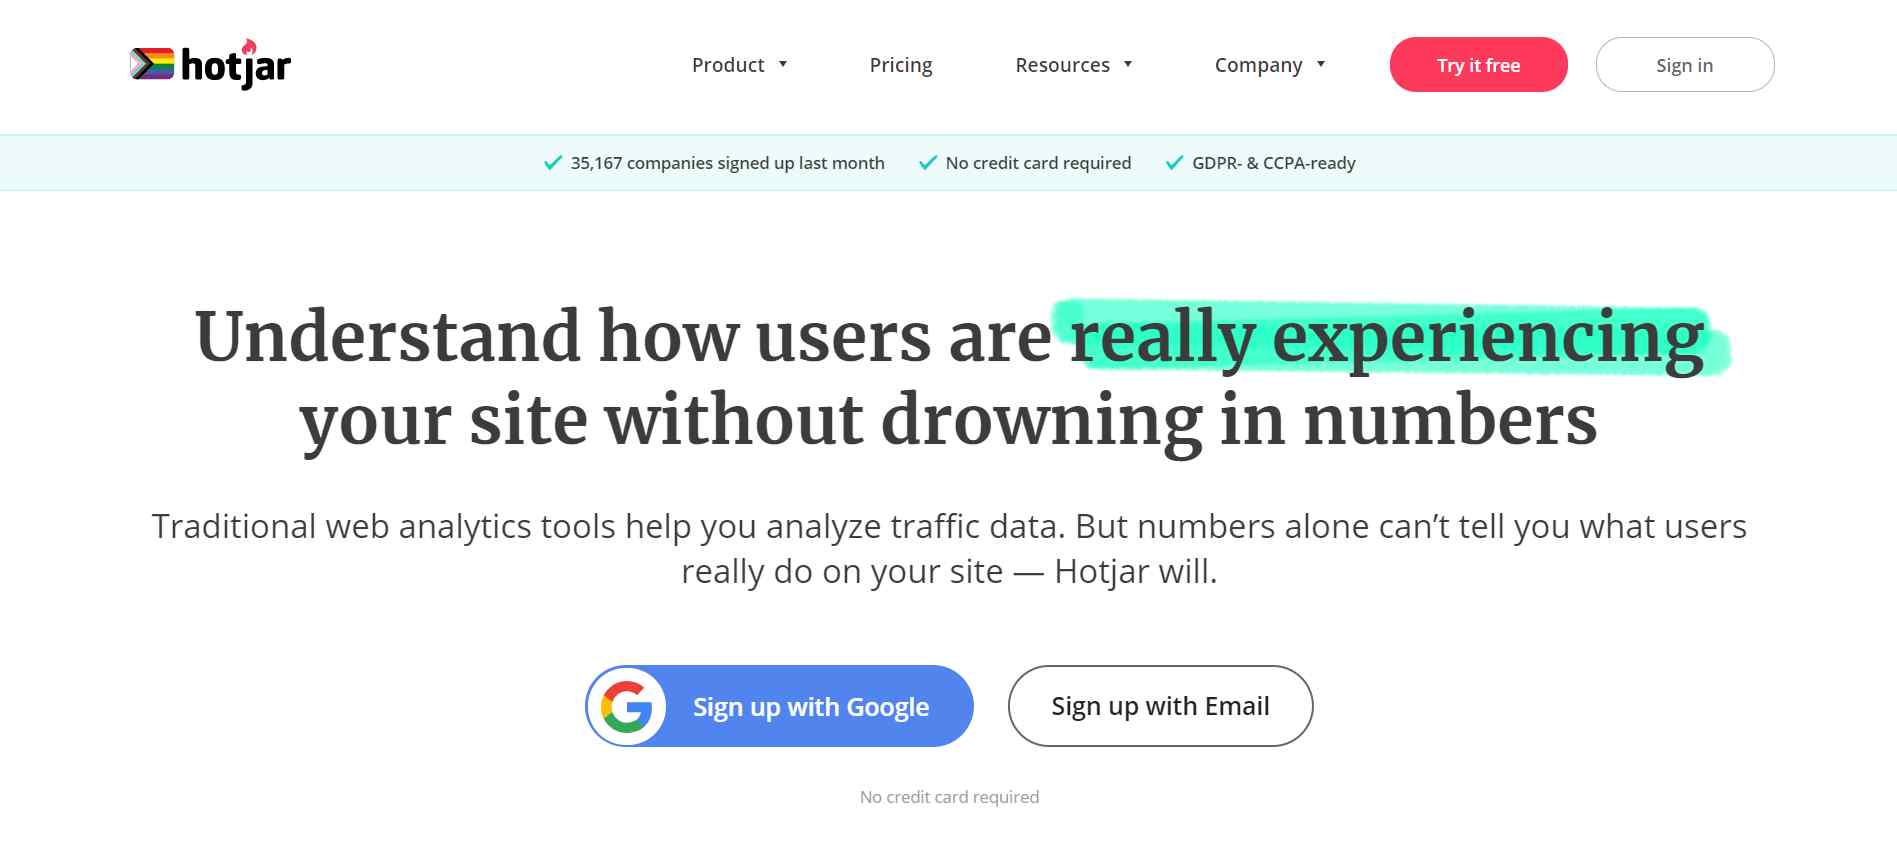 Hotjar is the top rated tool for user behavior for product marketers